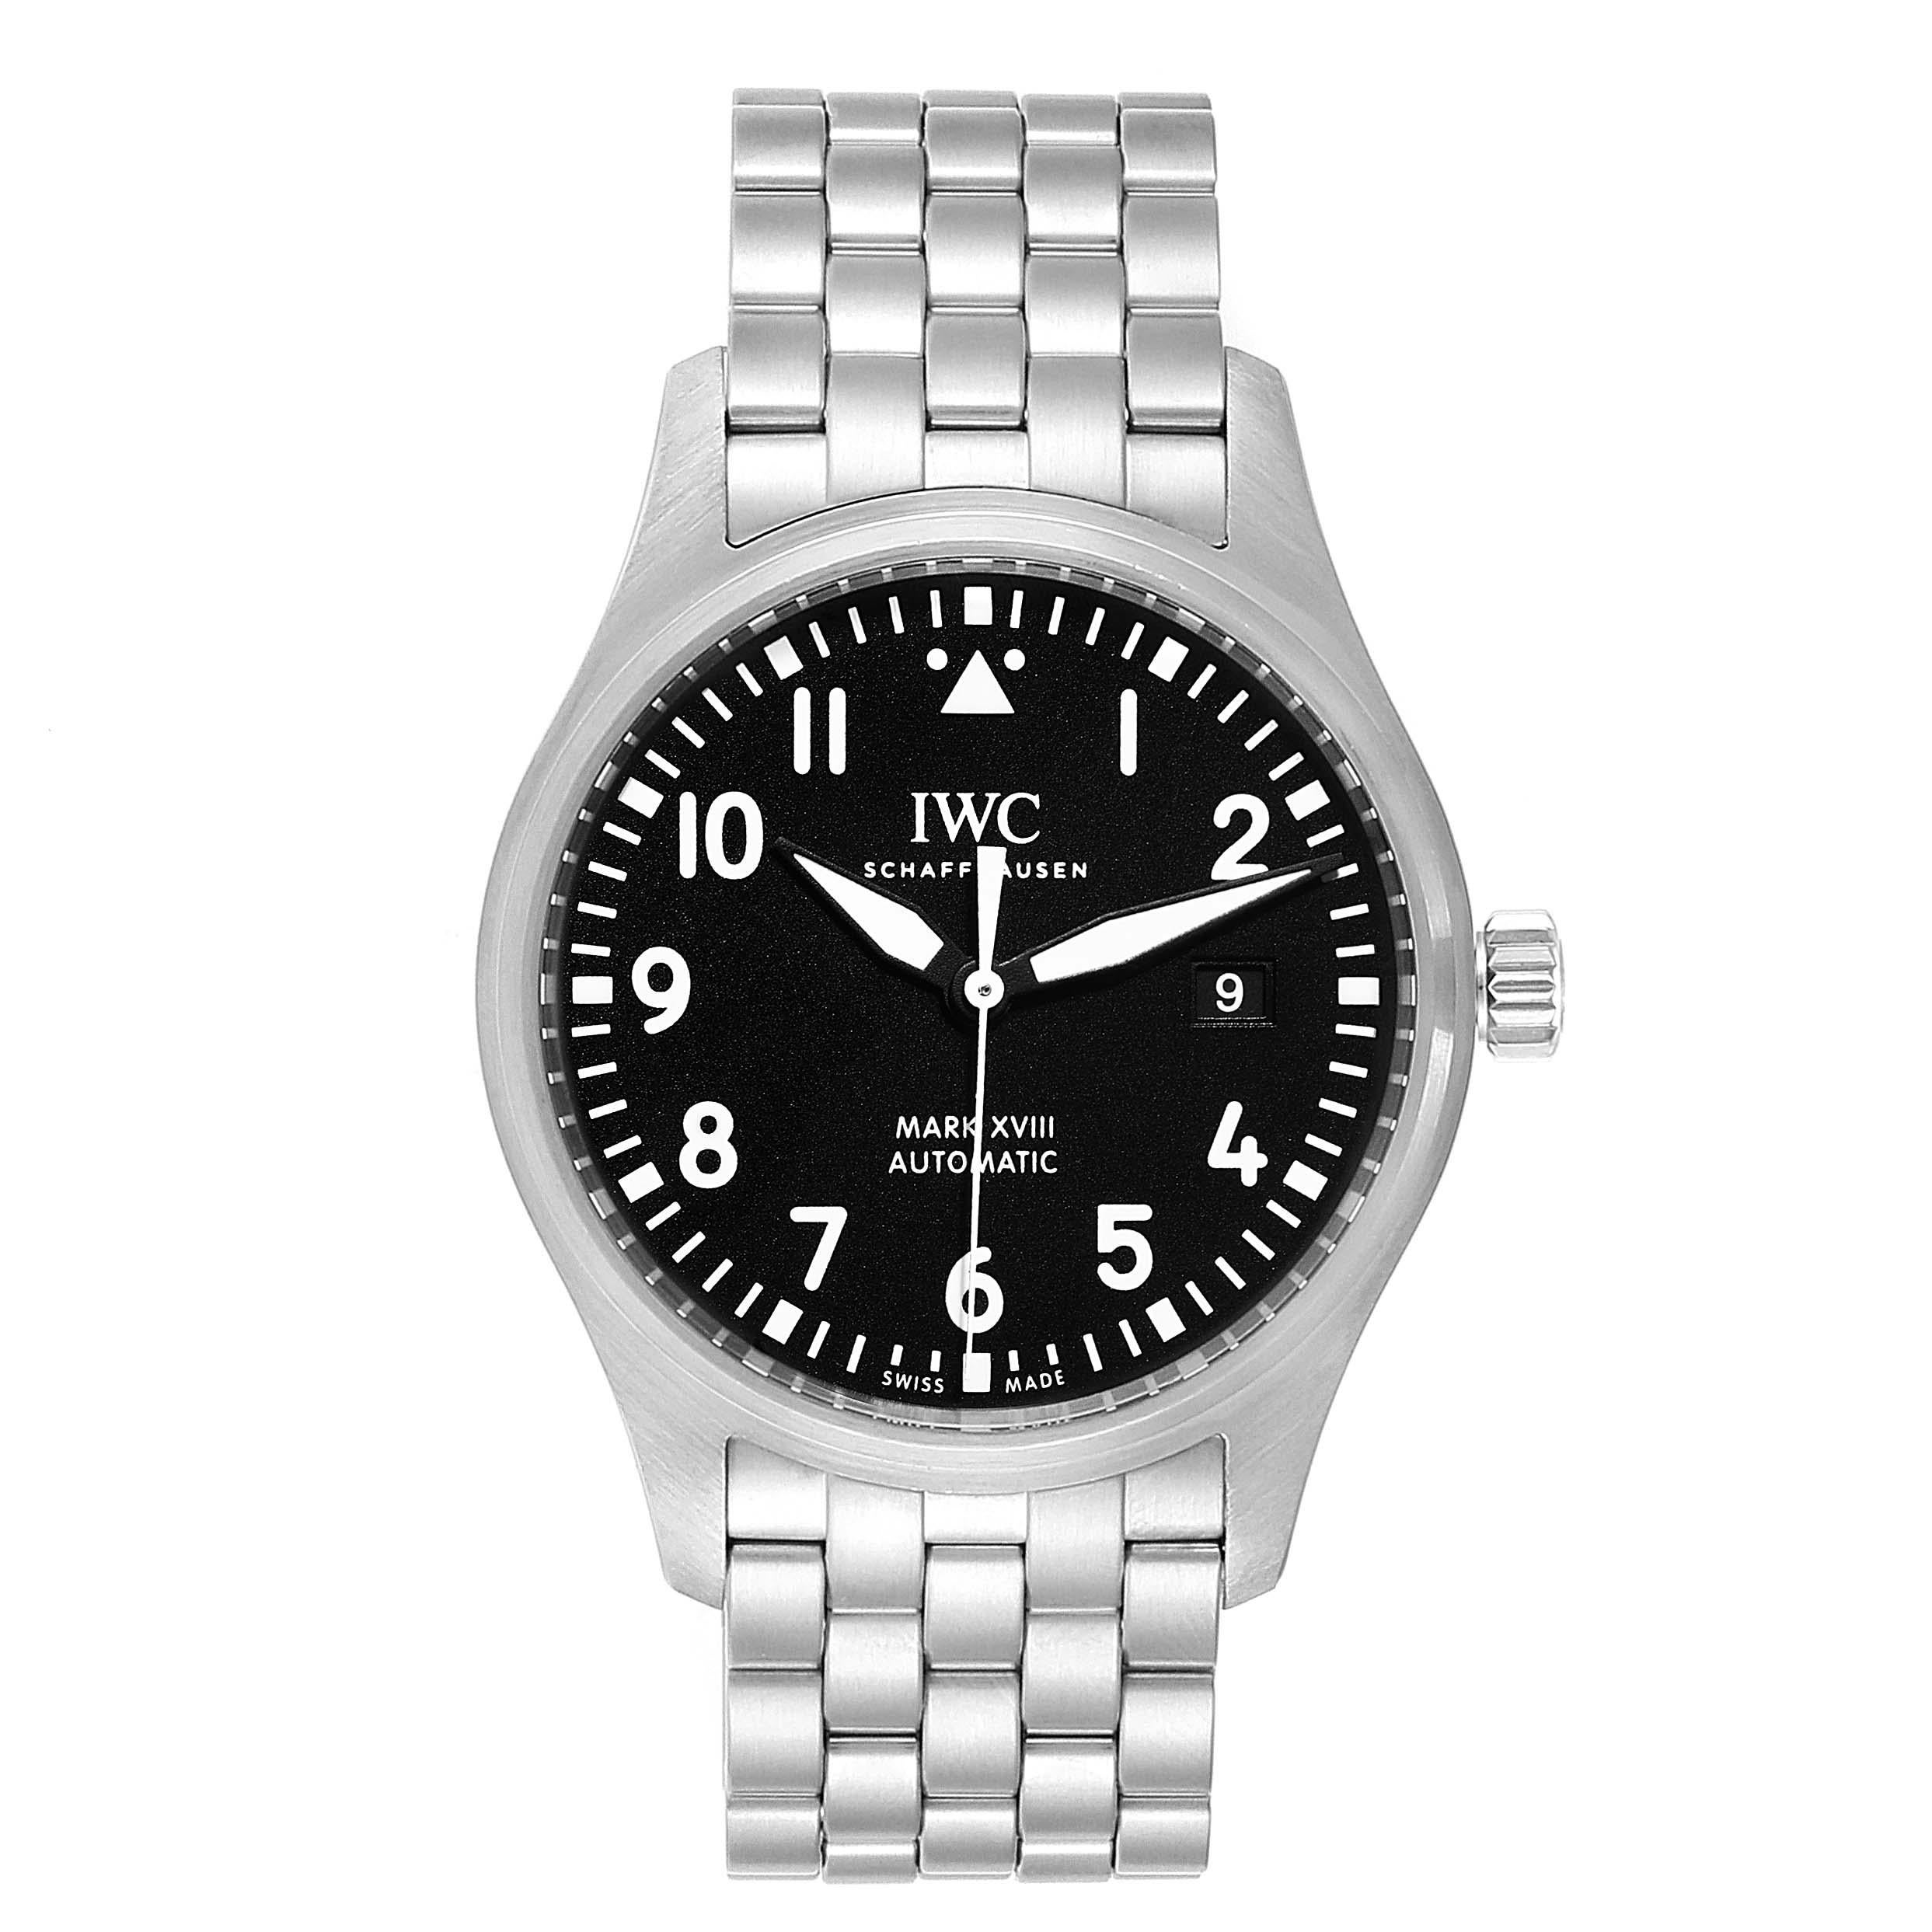 IWC Pilot Mark XVIII Black Dial Steel Mens Watch IW327011 Card. Automatic self-winding movement with 42 hour power reserve. Stainless steel case 40 mm in diameter. Stainless steel bezel. Scratch resistant sapphire crystal. Black dial with luminous